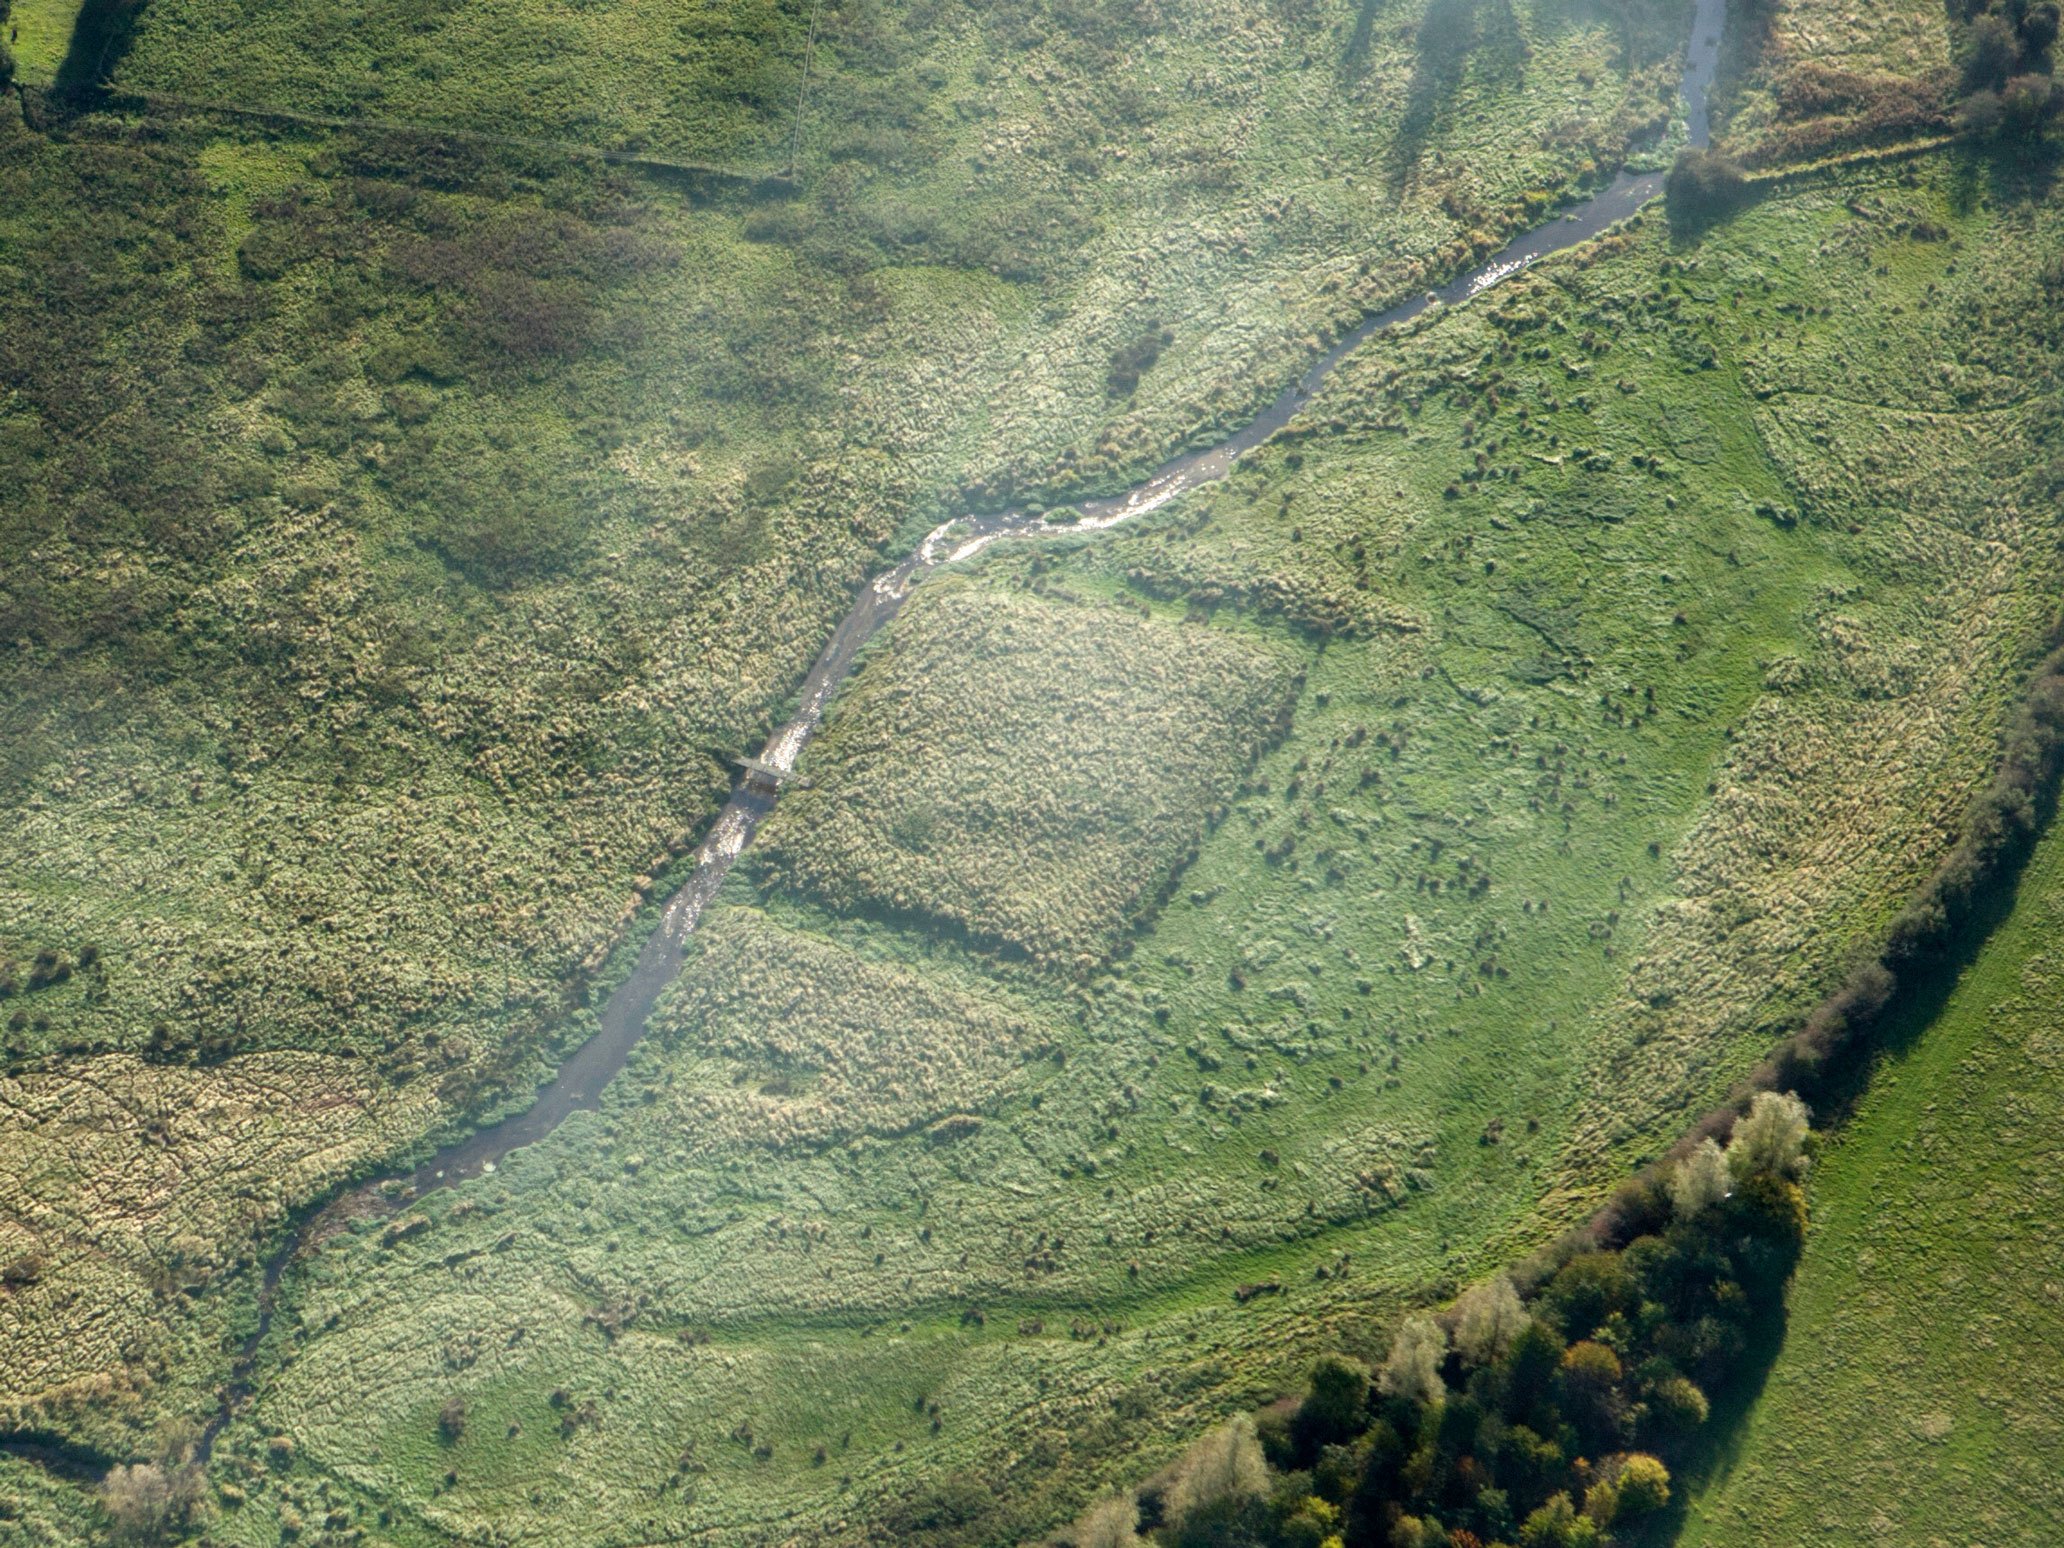 A colour aerial photograph showing earthworks next to a watercourse running through a landscape.